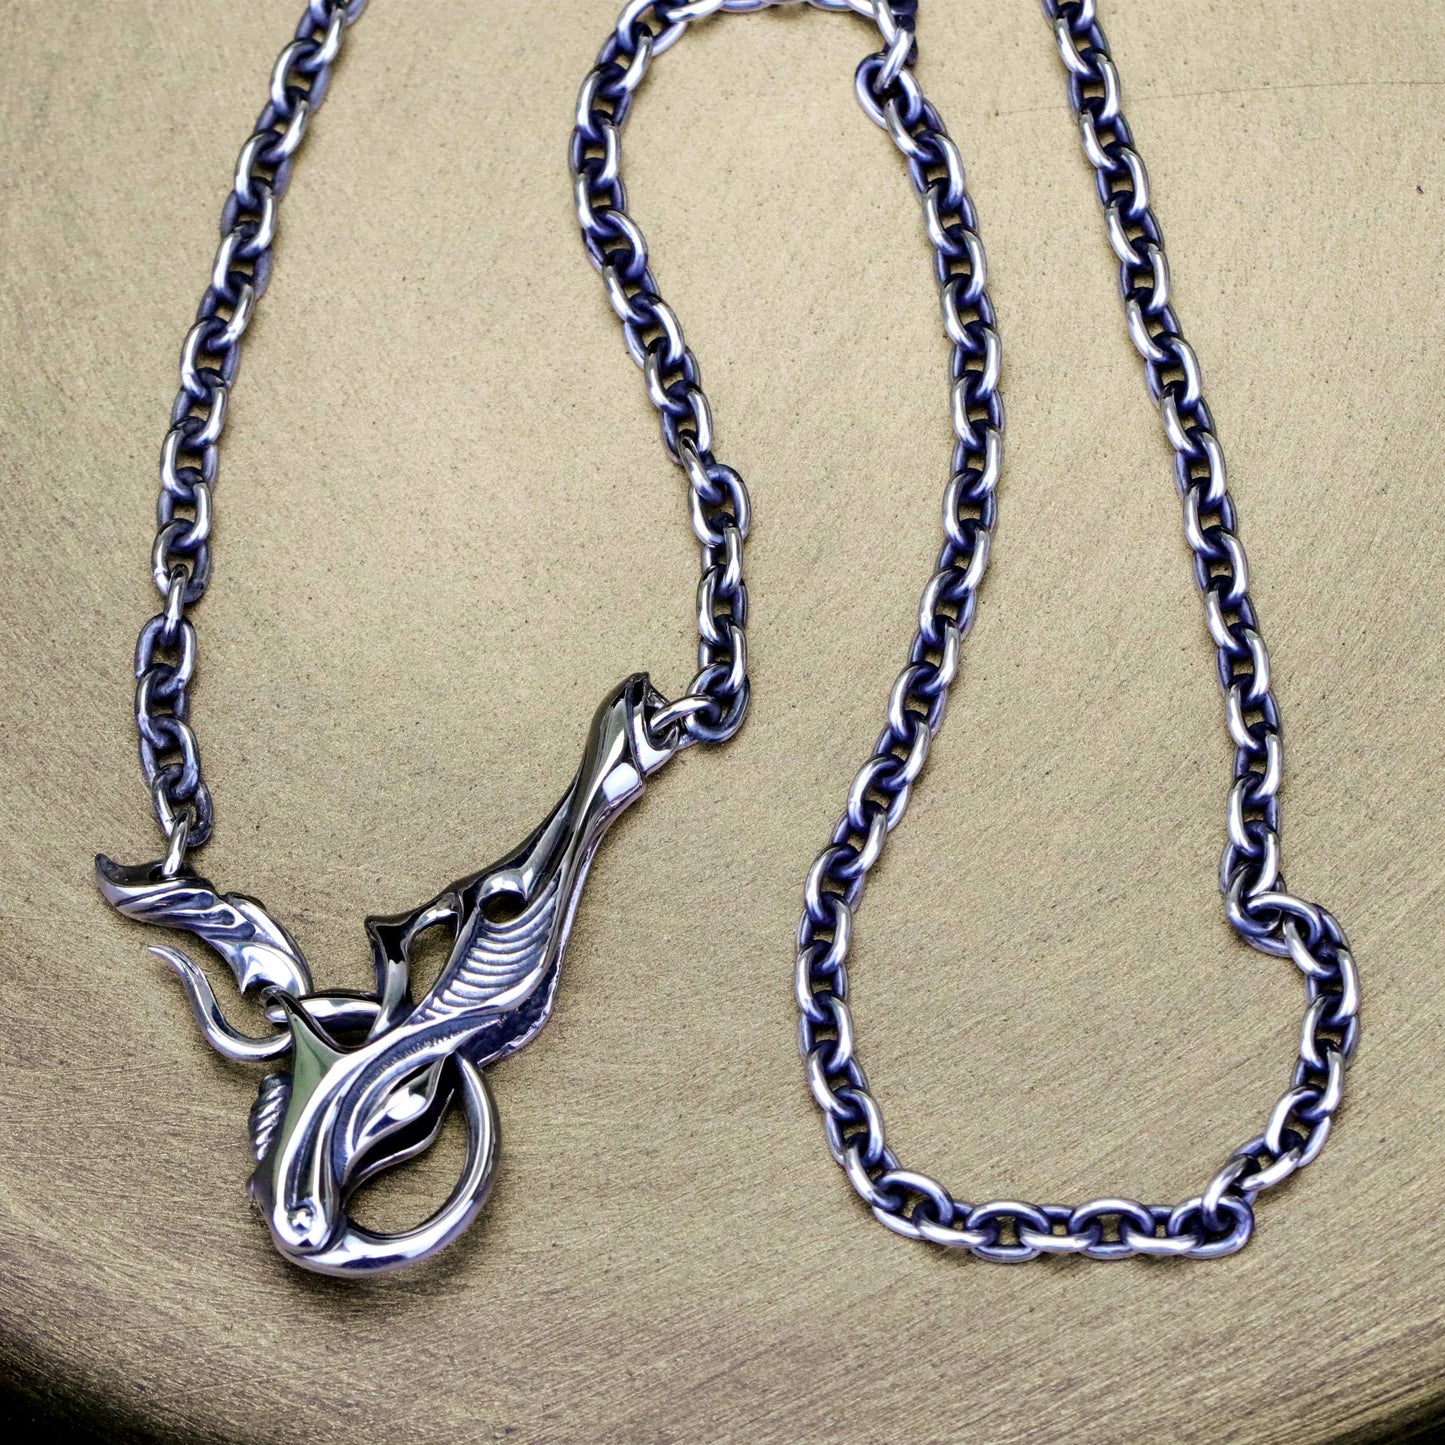 Ability Normal AN-VN-13 necklace